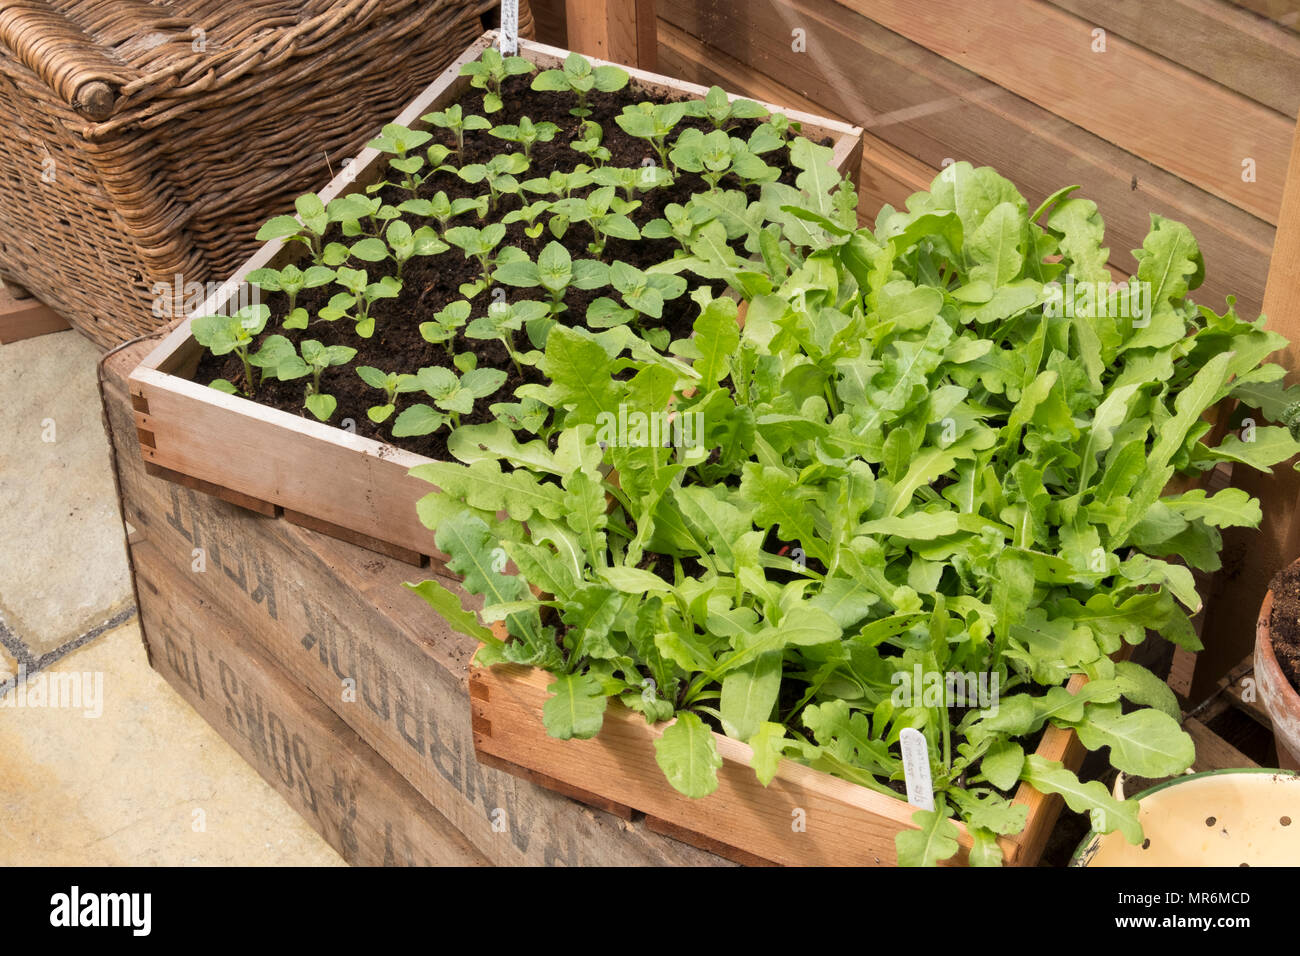 greenhouse with display of seed trays and flower pots Stock Photo